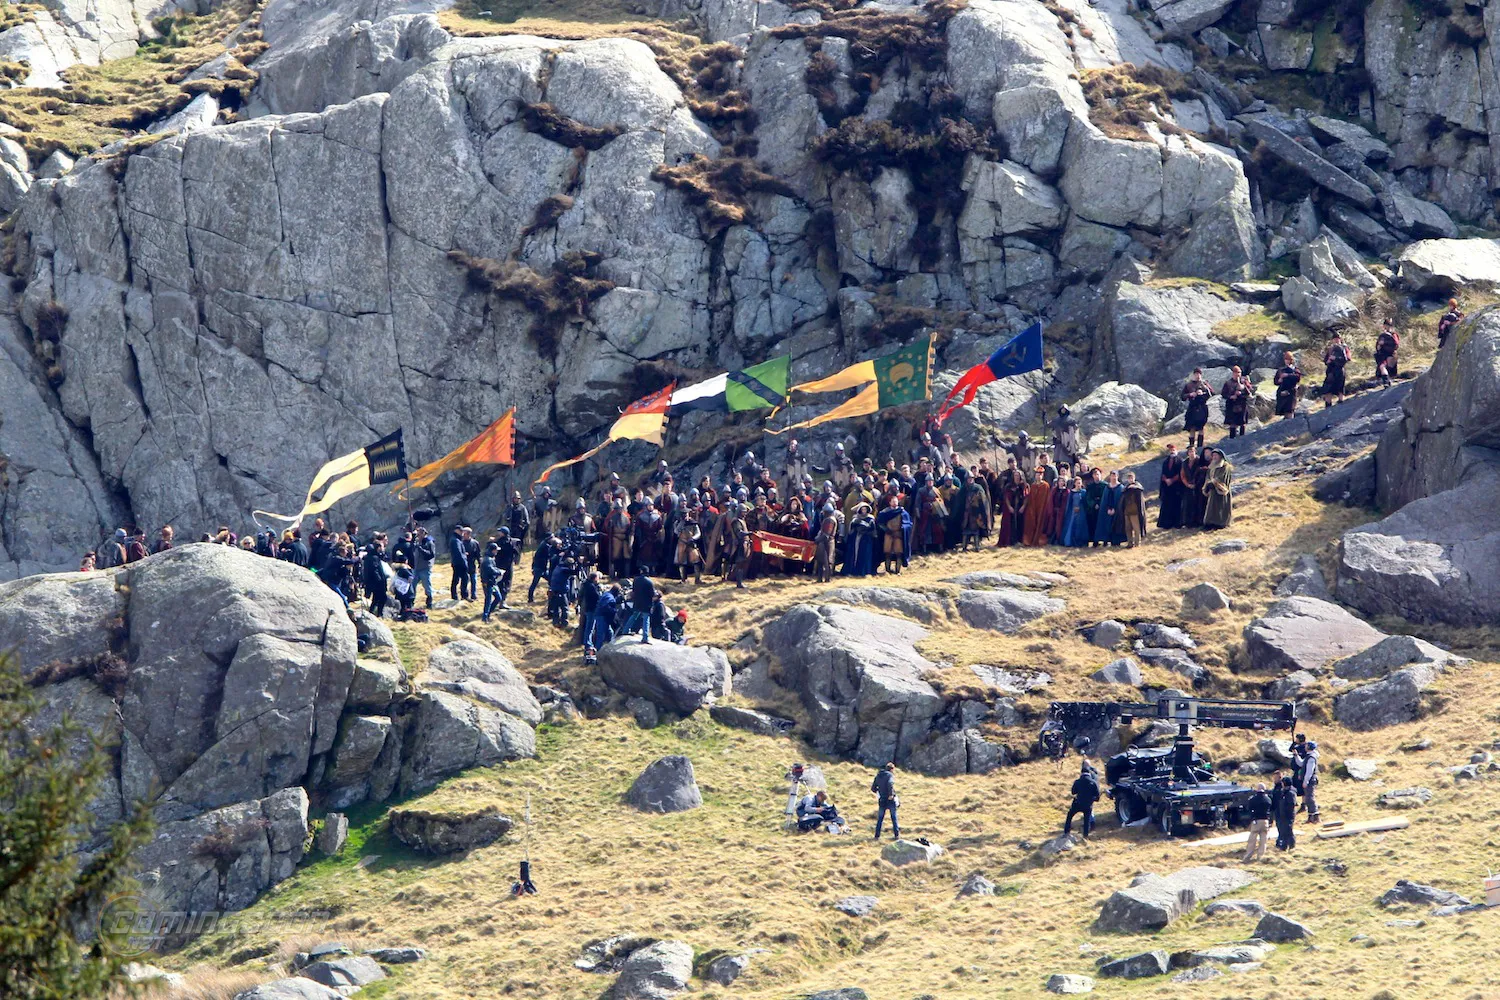 'Knights of the Roundtable: King Arthur' filming in Wales

Featuring: Atmosphere
Where: Conwy, United Kingdom
When: 14 Apr 2015
Credit: WENN.com